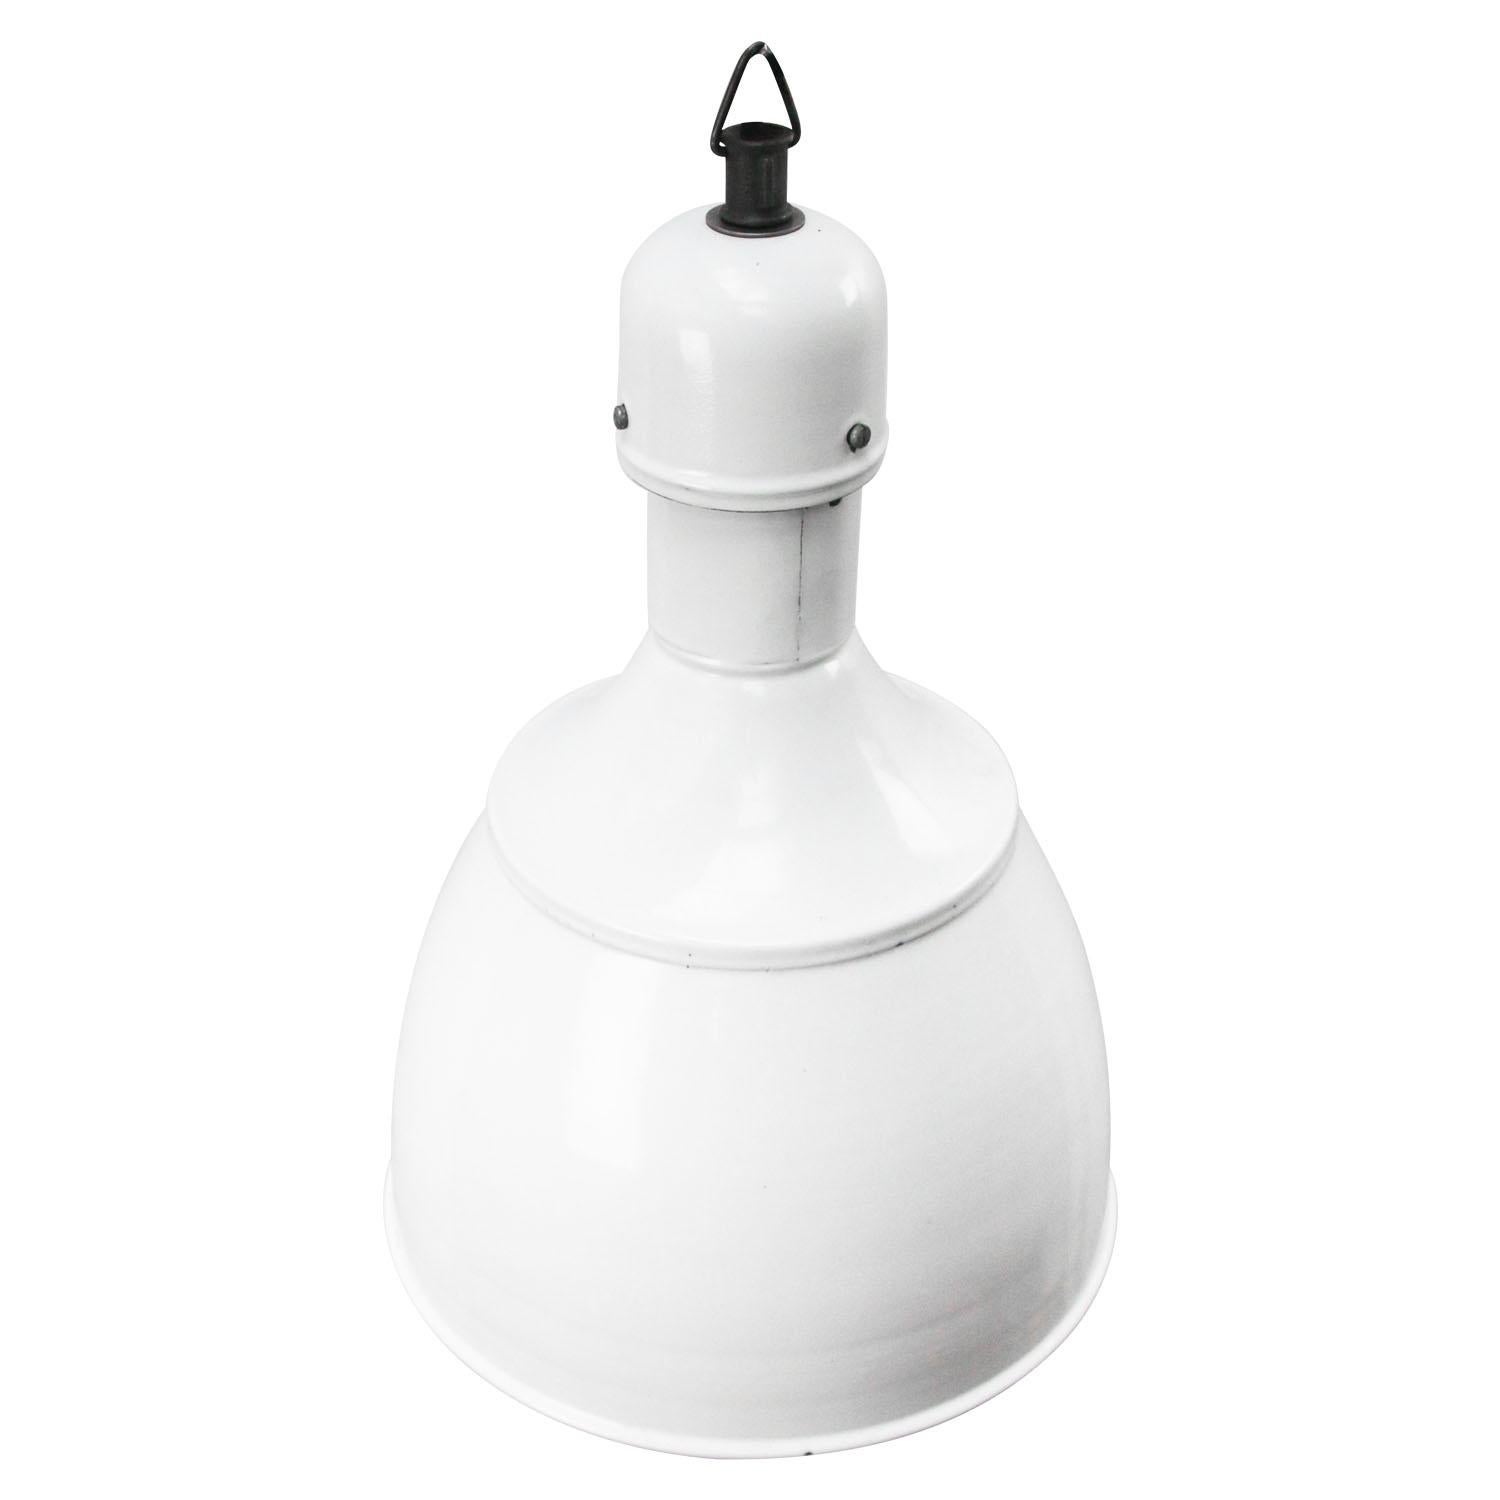 White enamel vintage industrial pendants hanging lights NOS
European industrial classic. Rare model. Used in warehouses and factories in East Europe. New old stock. 

Weight 2.3 kg or 5.1 lb.

Priced per individual item. All lamps have been